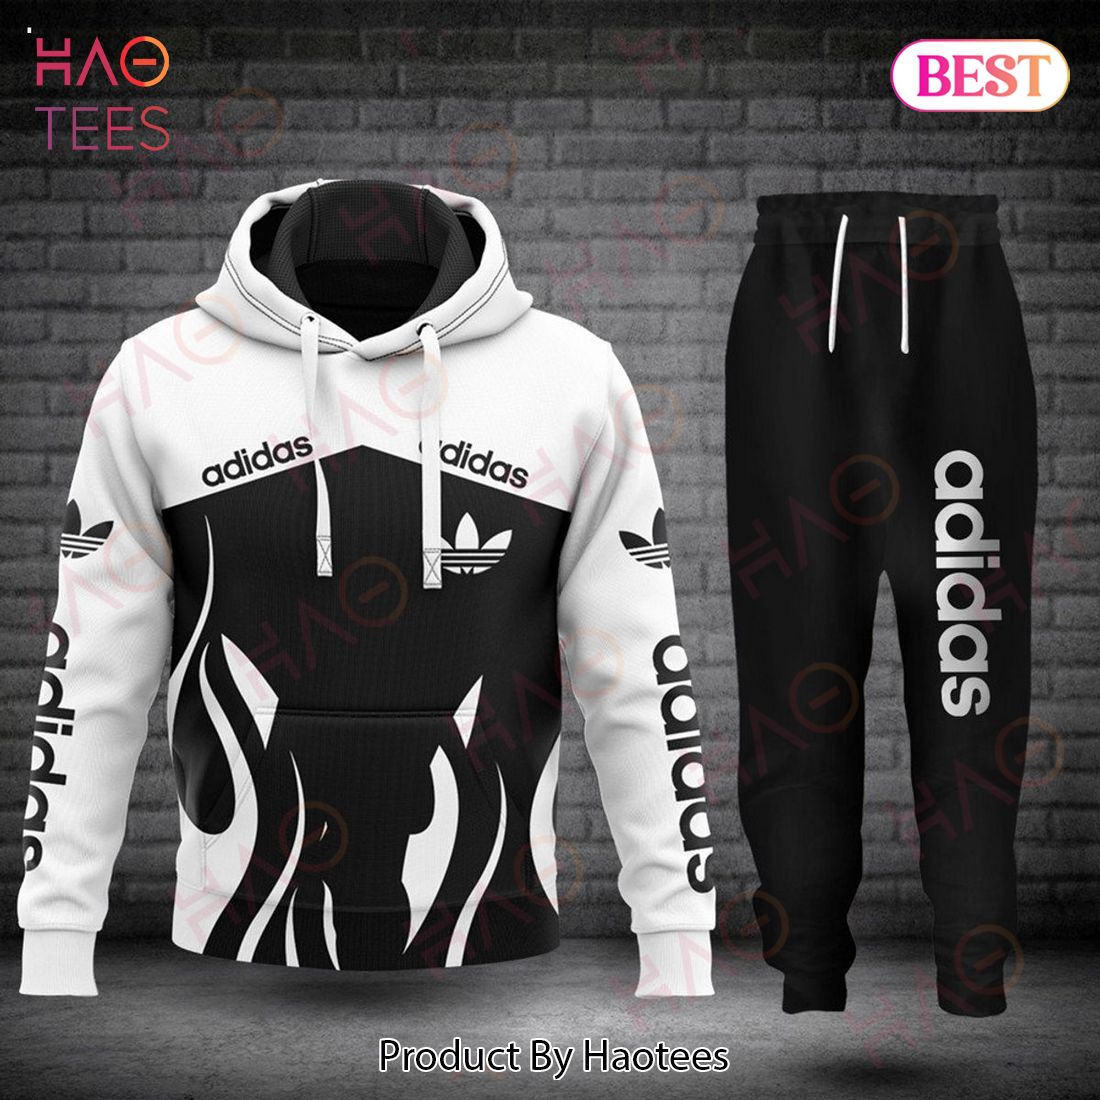 HOT Adidas White Mix Black Luxury Brand Hoodie And Pants Limited Edition